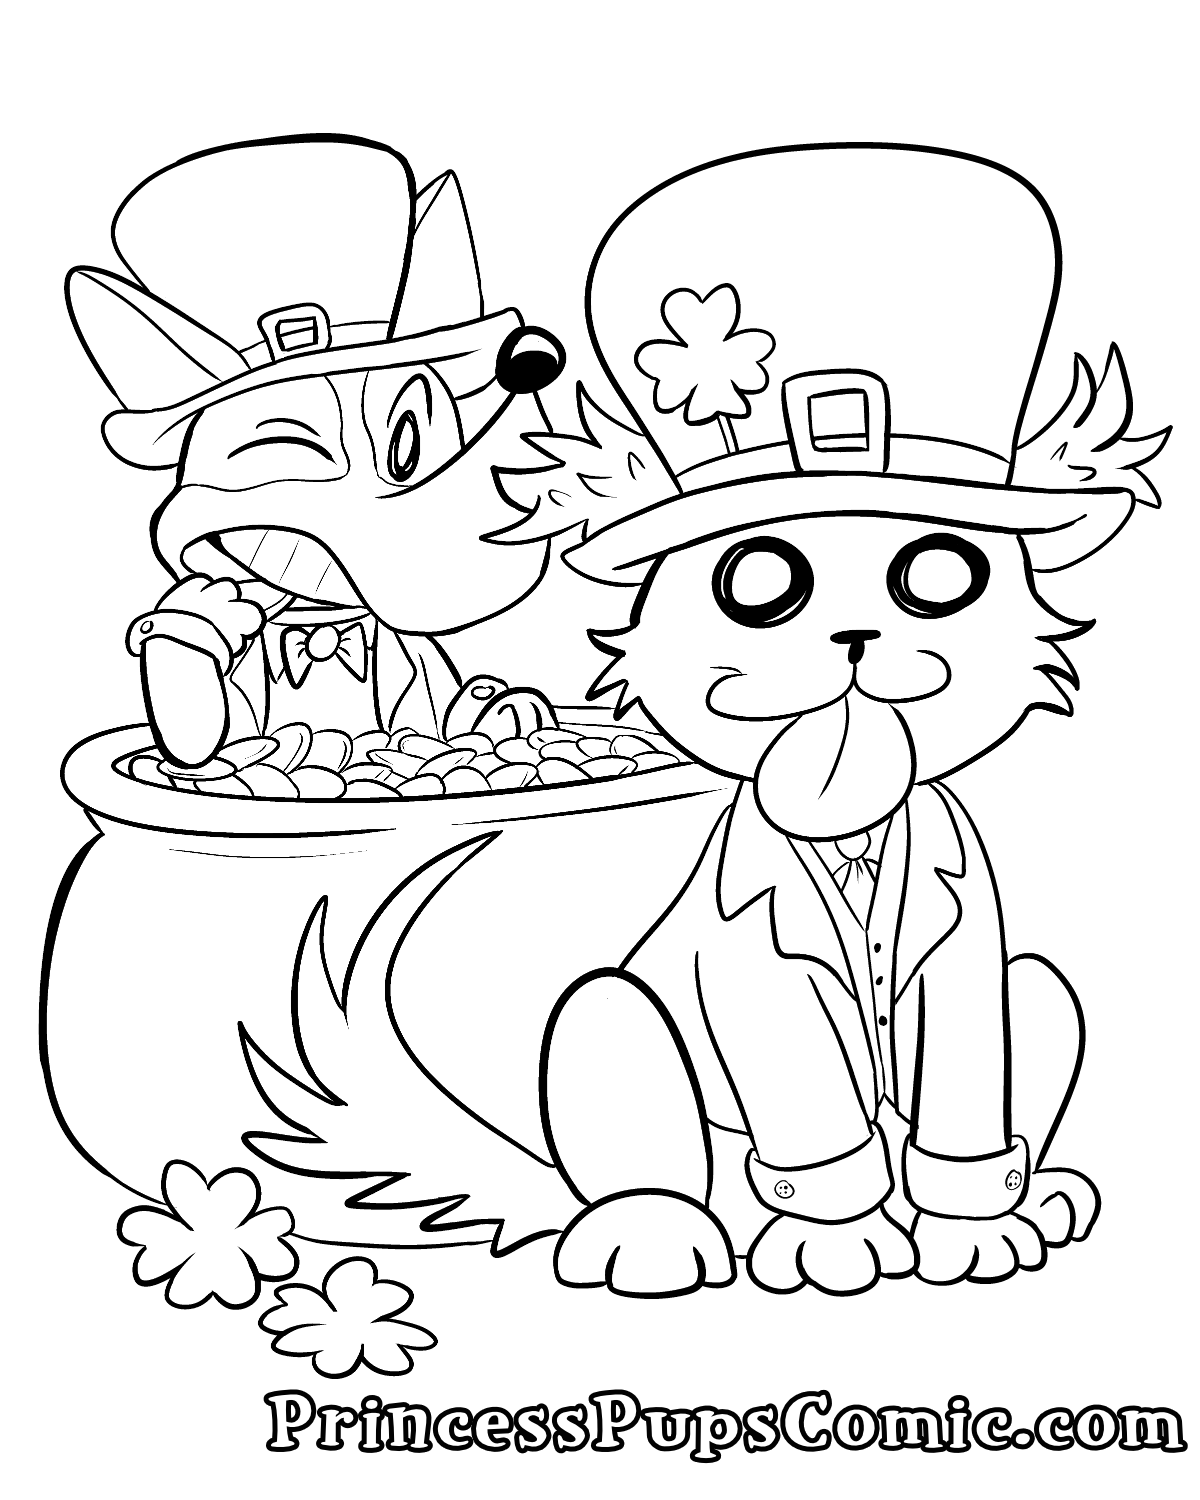 A coloring page image of Scruffy Pup dressed in St. Patrick's Day themed outfit. A pot of gold is behind her and Corgi Pup is sticking out, biting into one of the gold coins. Two four-leaf clovers are on the ground nearby